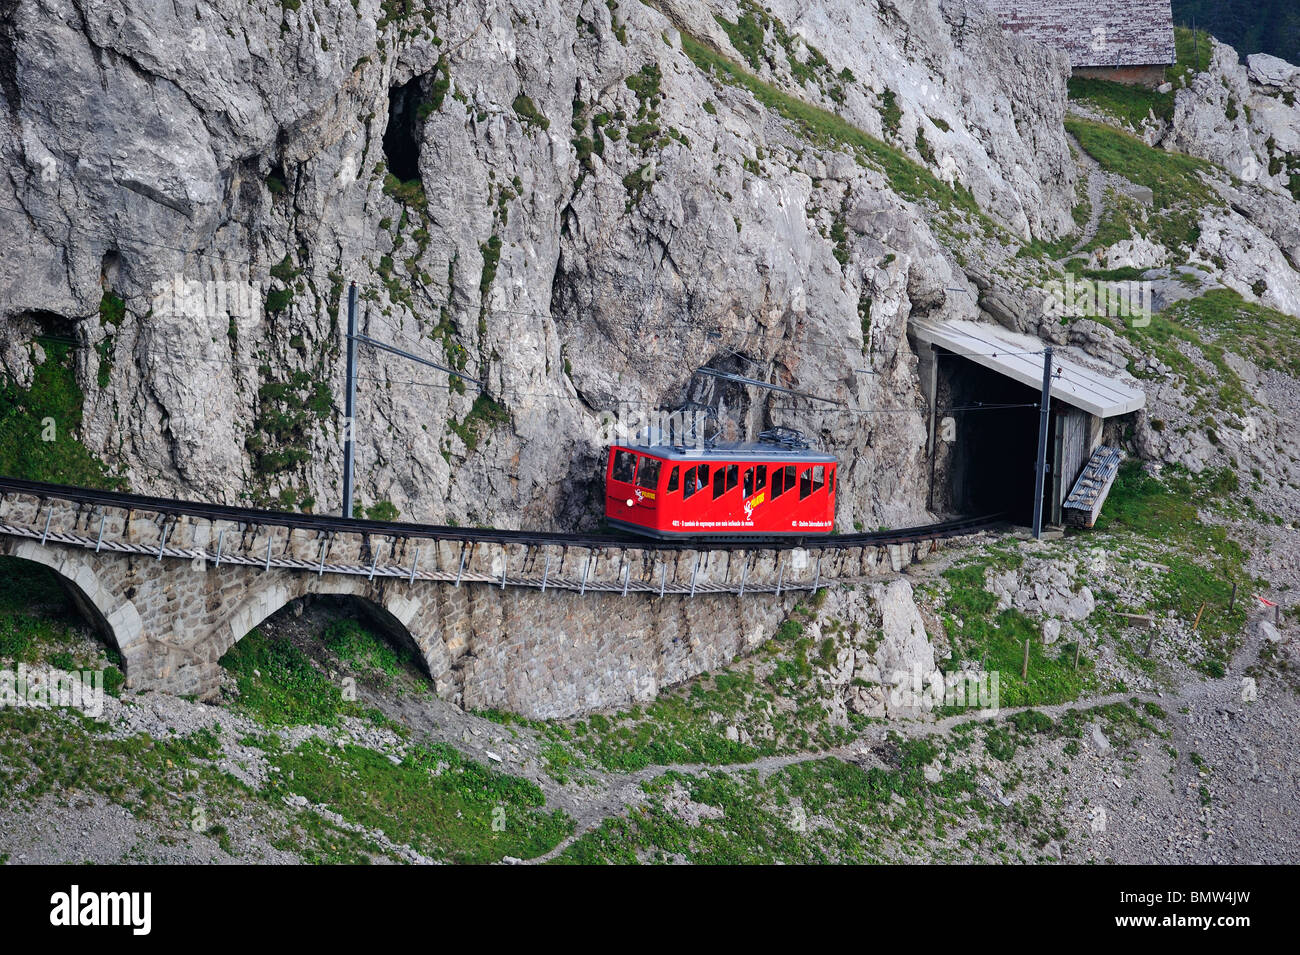 The rack and pinion railway up Mount Pilatus, central Switzerland, with train approaching the summit Stock Photo